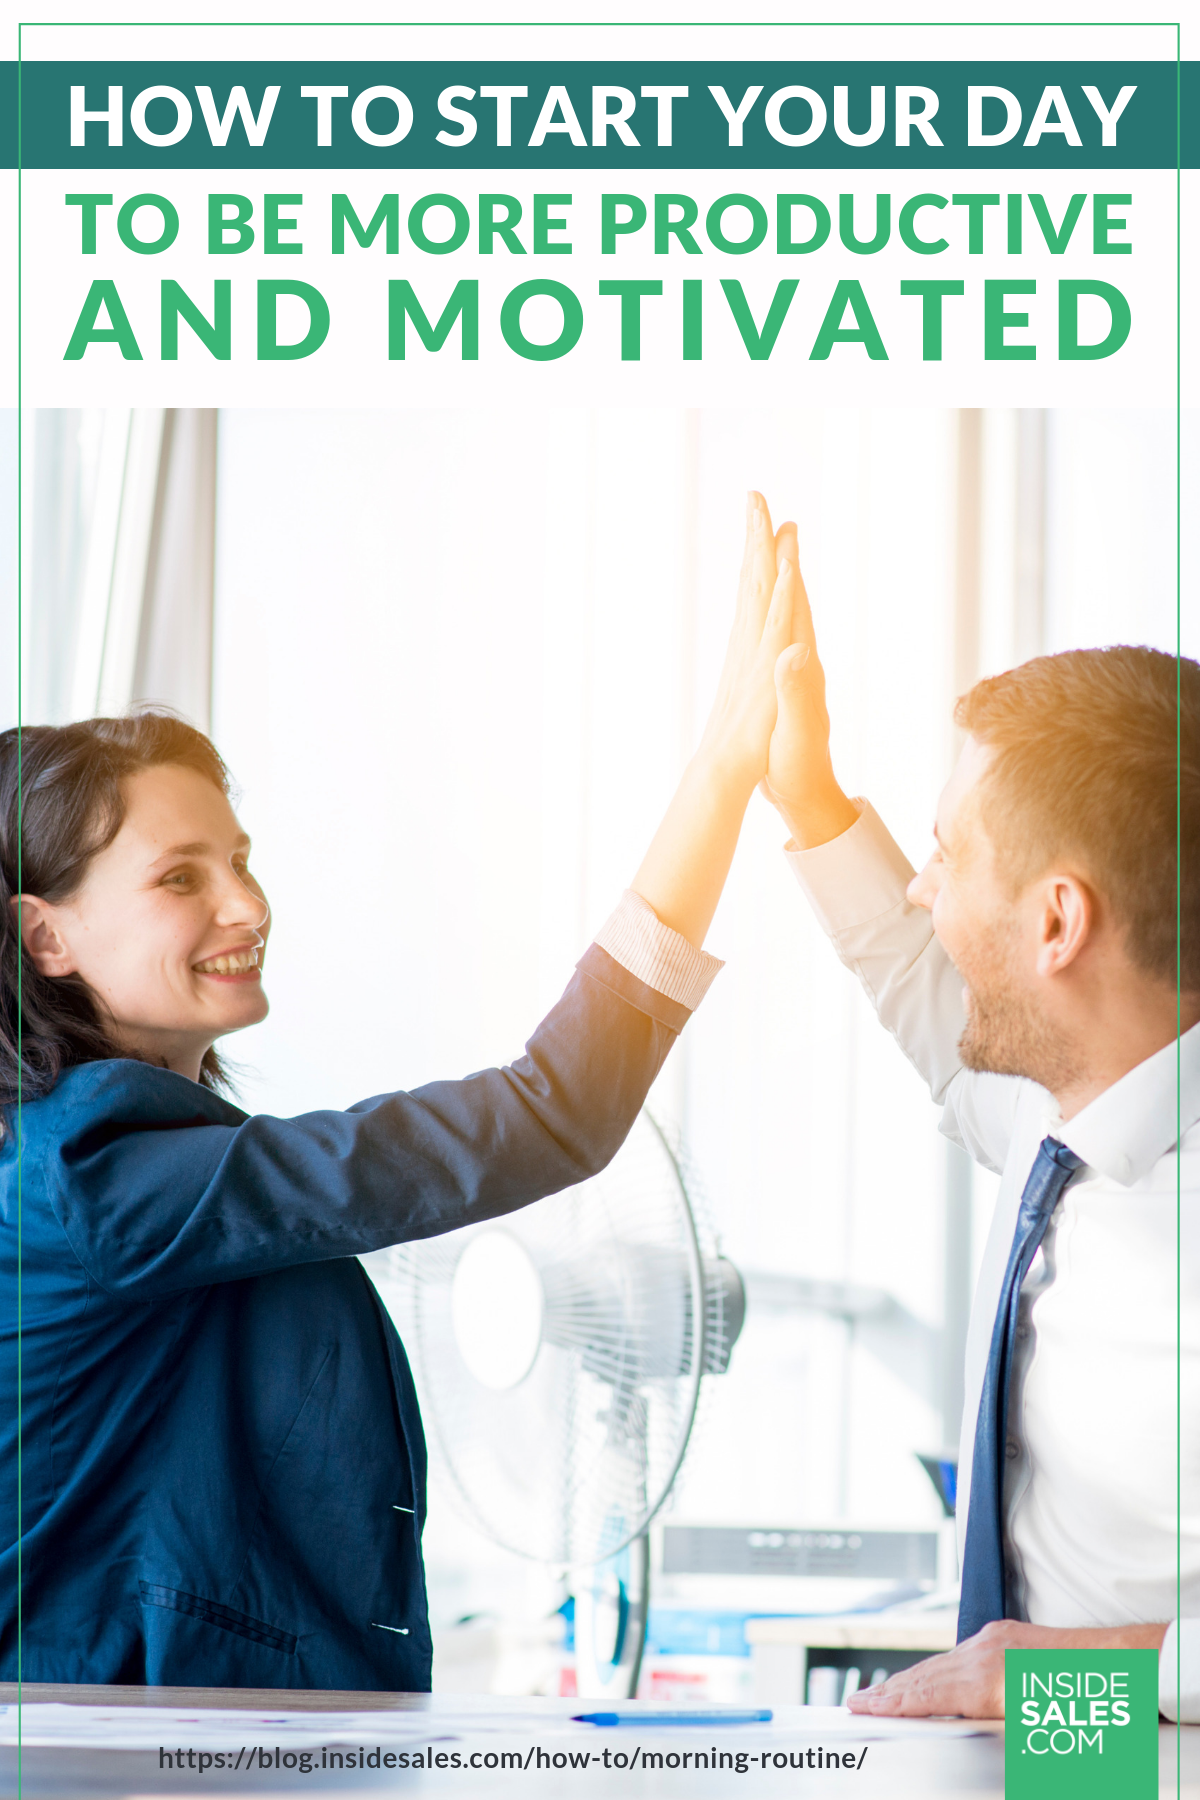 How To Start Your Day To Be More Productive And Motivated [INFOGRAPHIC] https://resources.insidesales.com/blog/how-to/morning-routine/